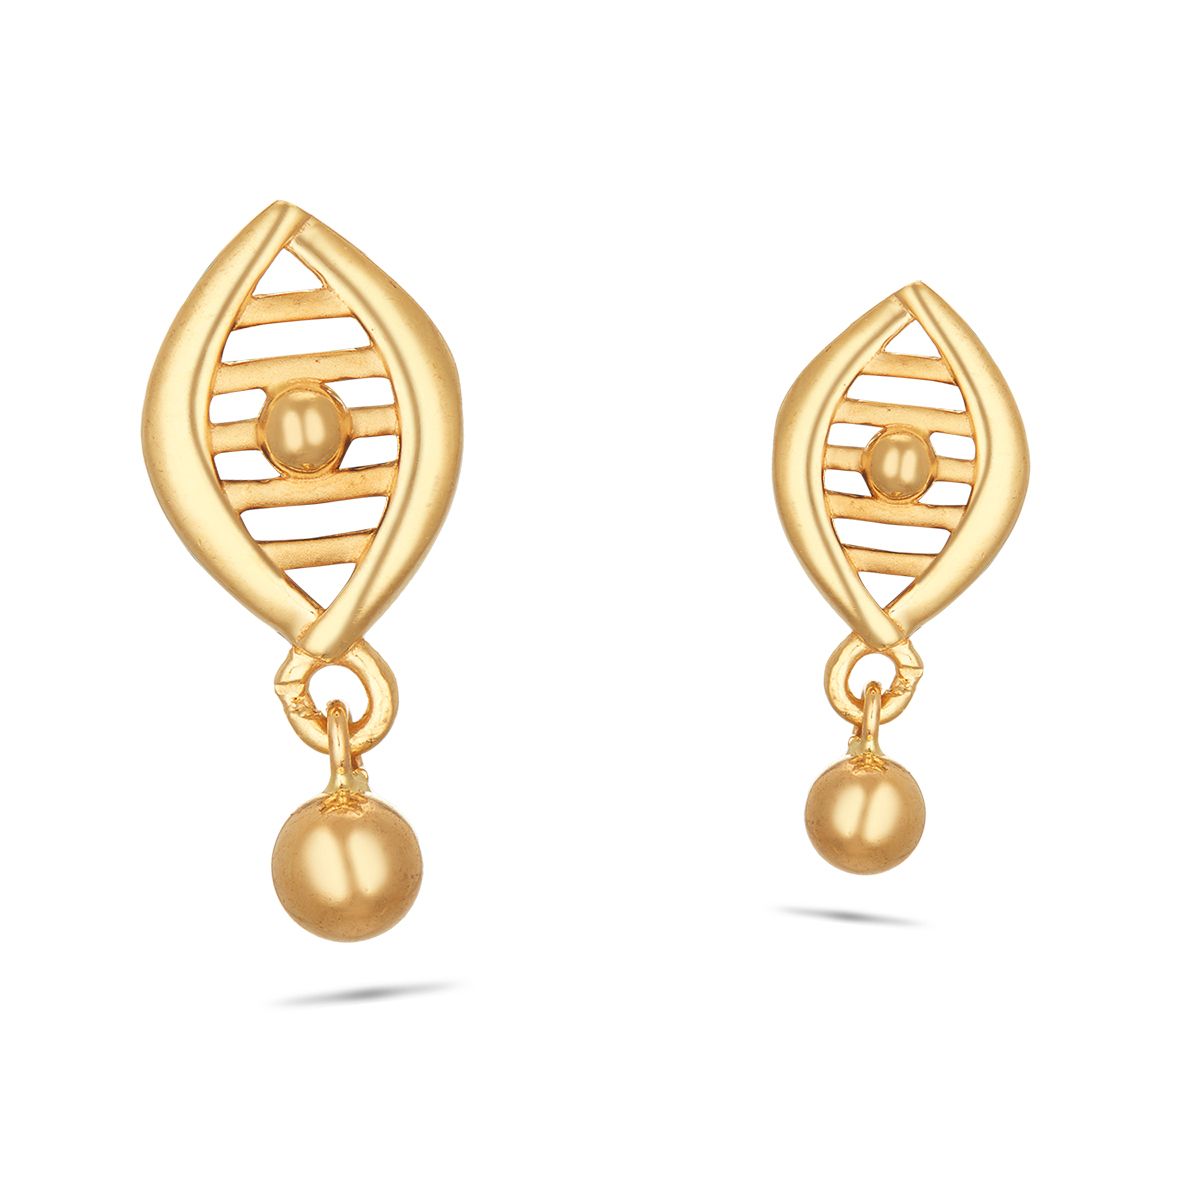 Beautiful light weight daily wear gold earrings designs / Latest earring  collections -2020 … | Gold earrings for kids, Gold earrings designs, Simple earring  designs